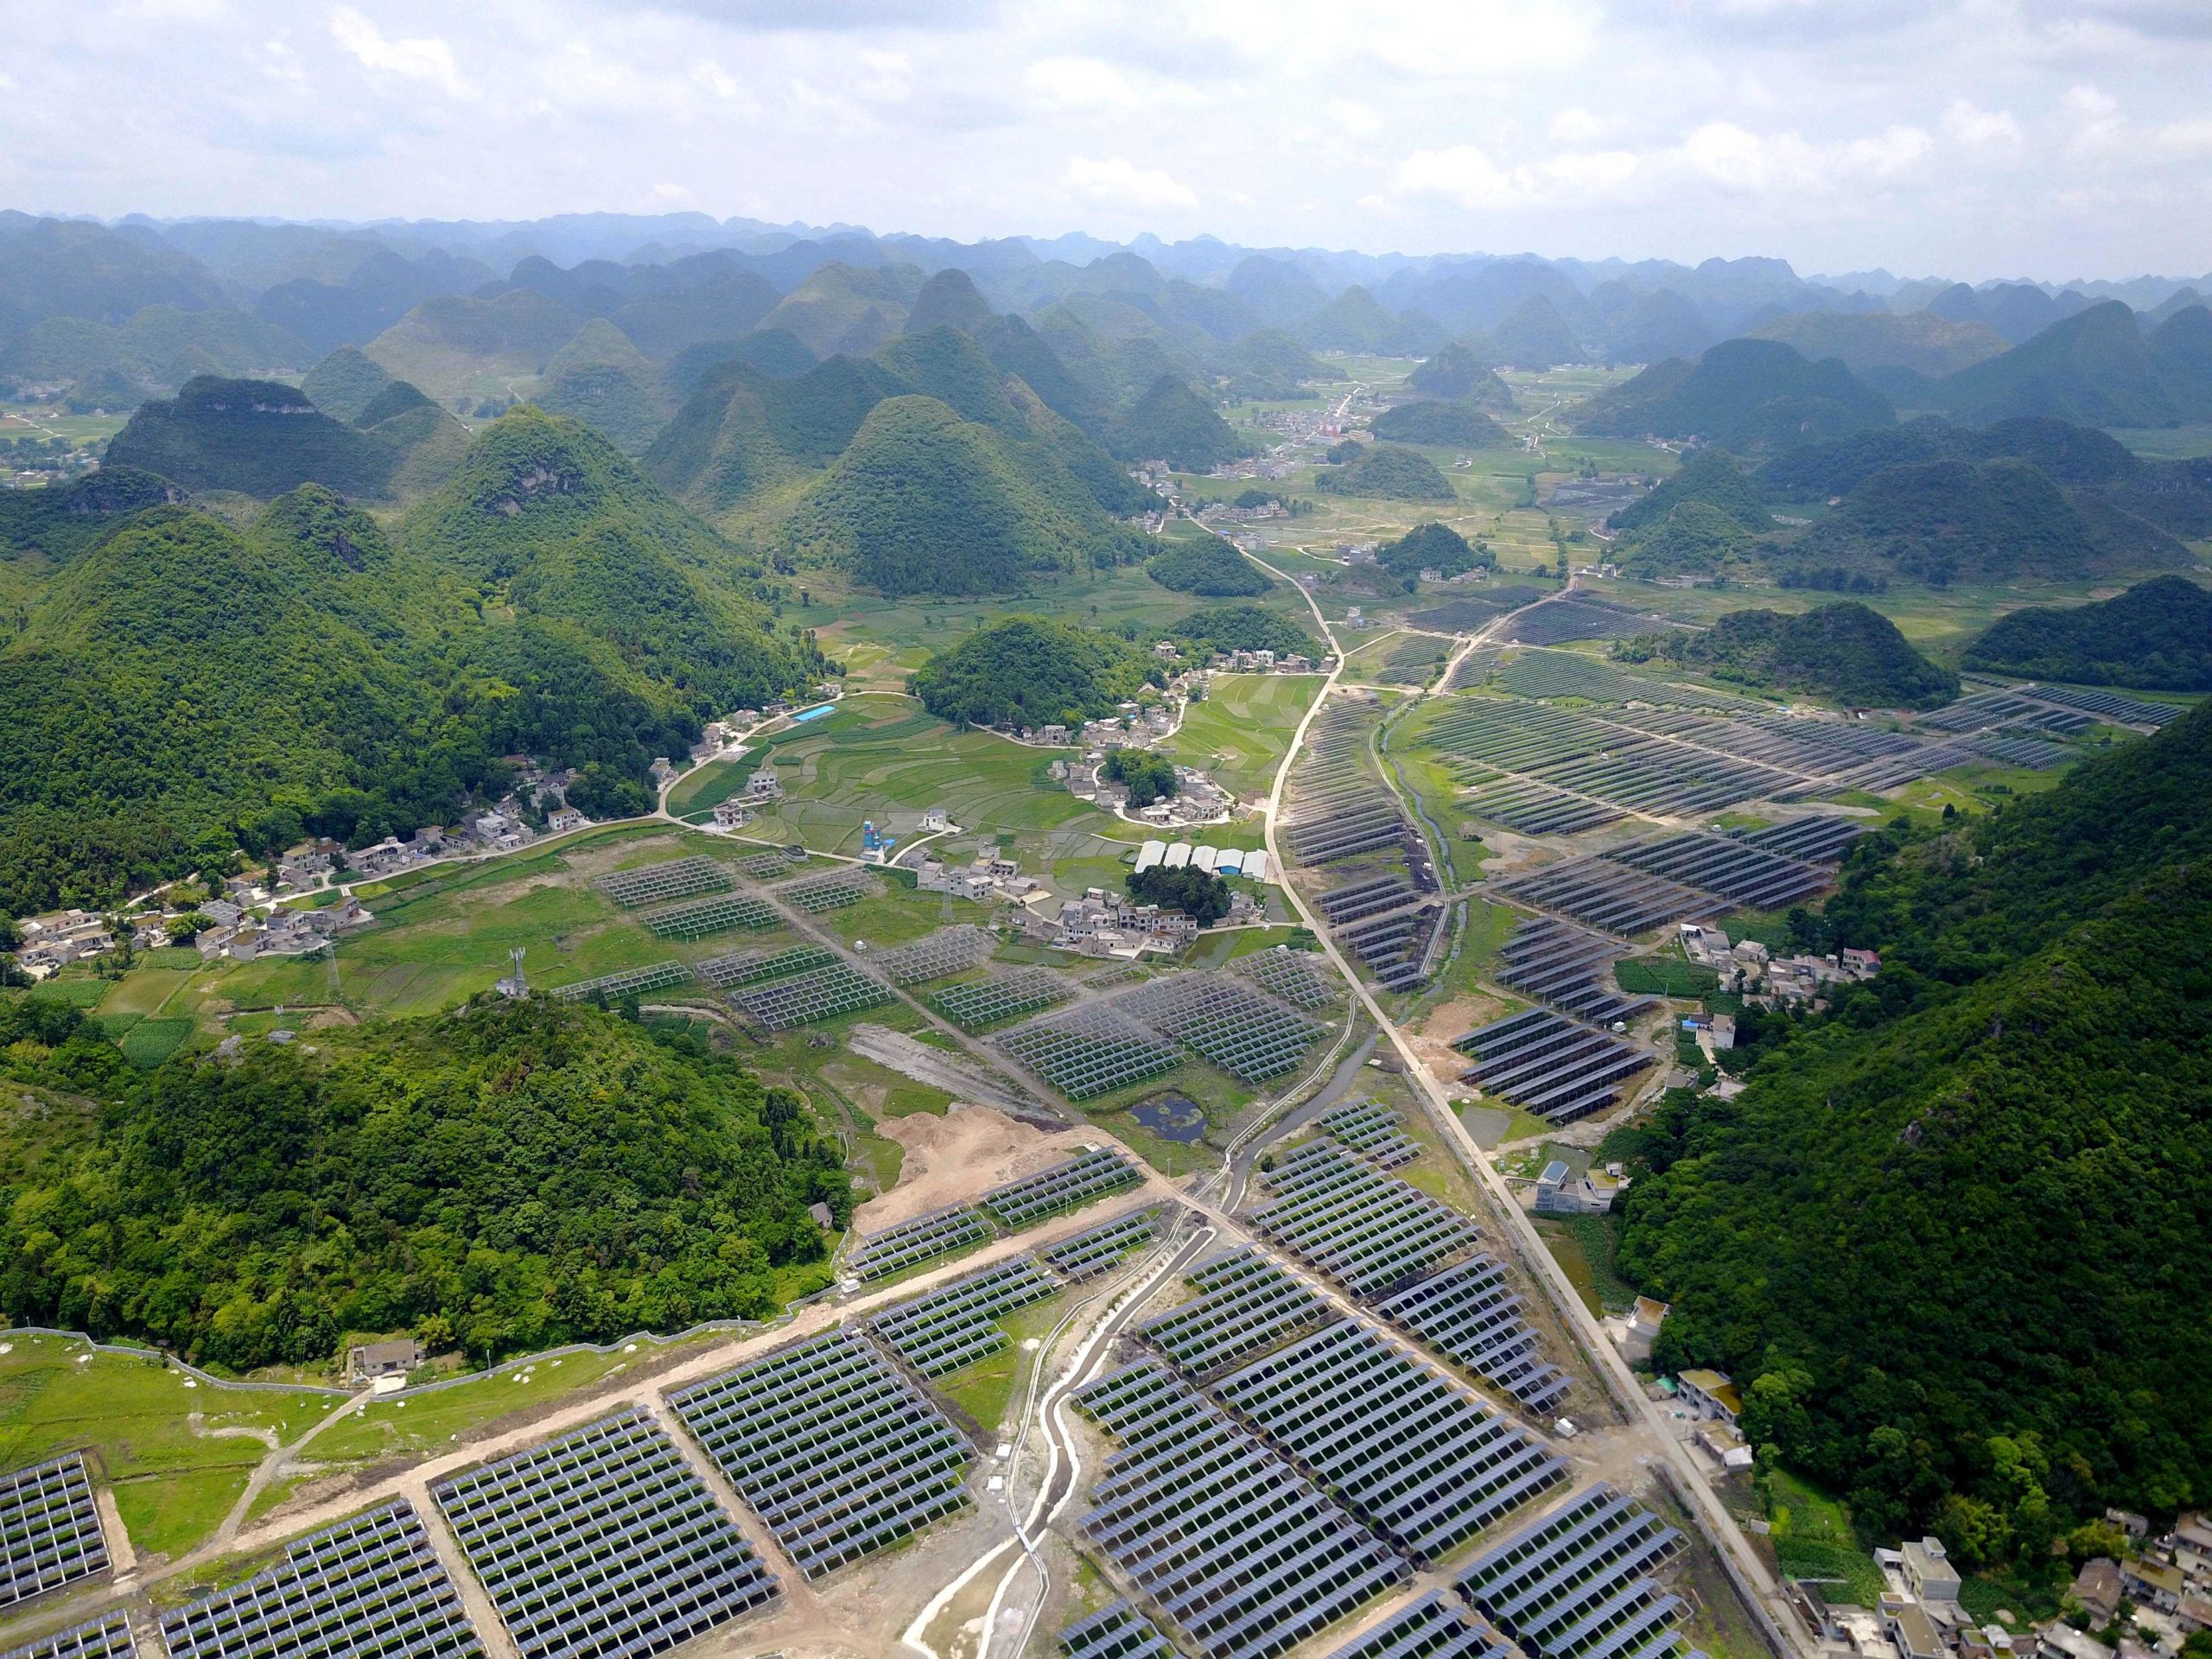 This photo taken on June 10, 2017 shows greenhouses built with solar panels on their roofs in China's southwest Guizhou province. (STR/AFP via Getty Images)